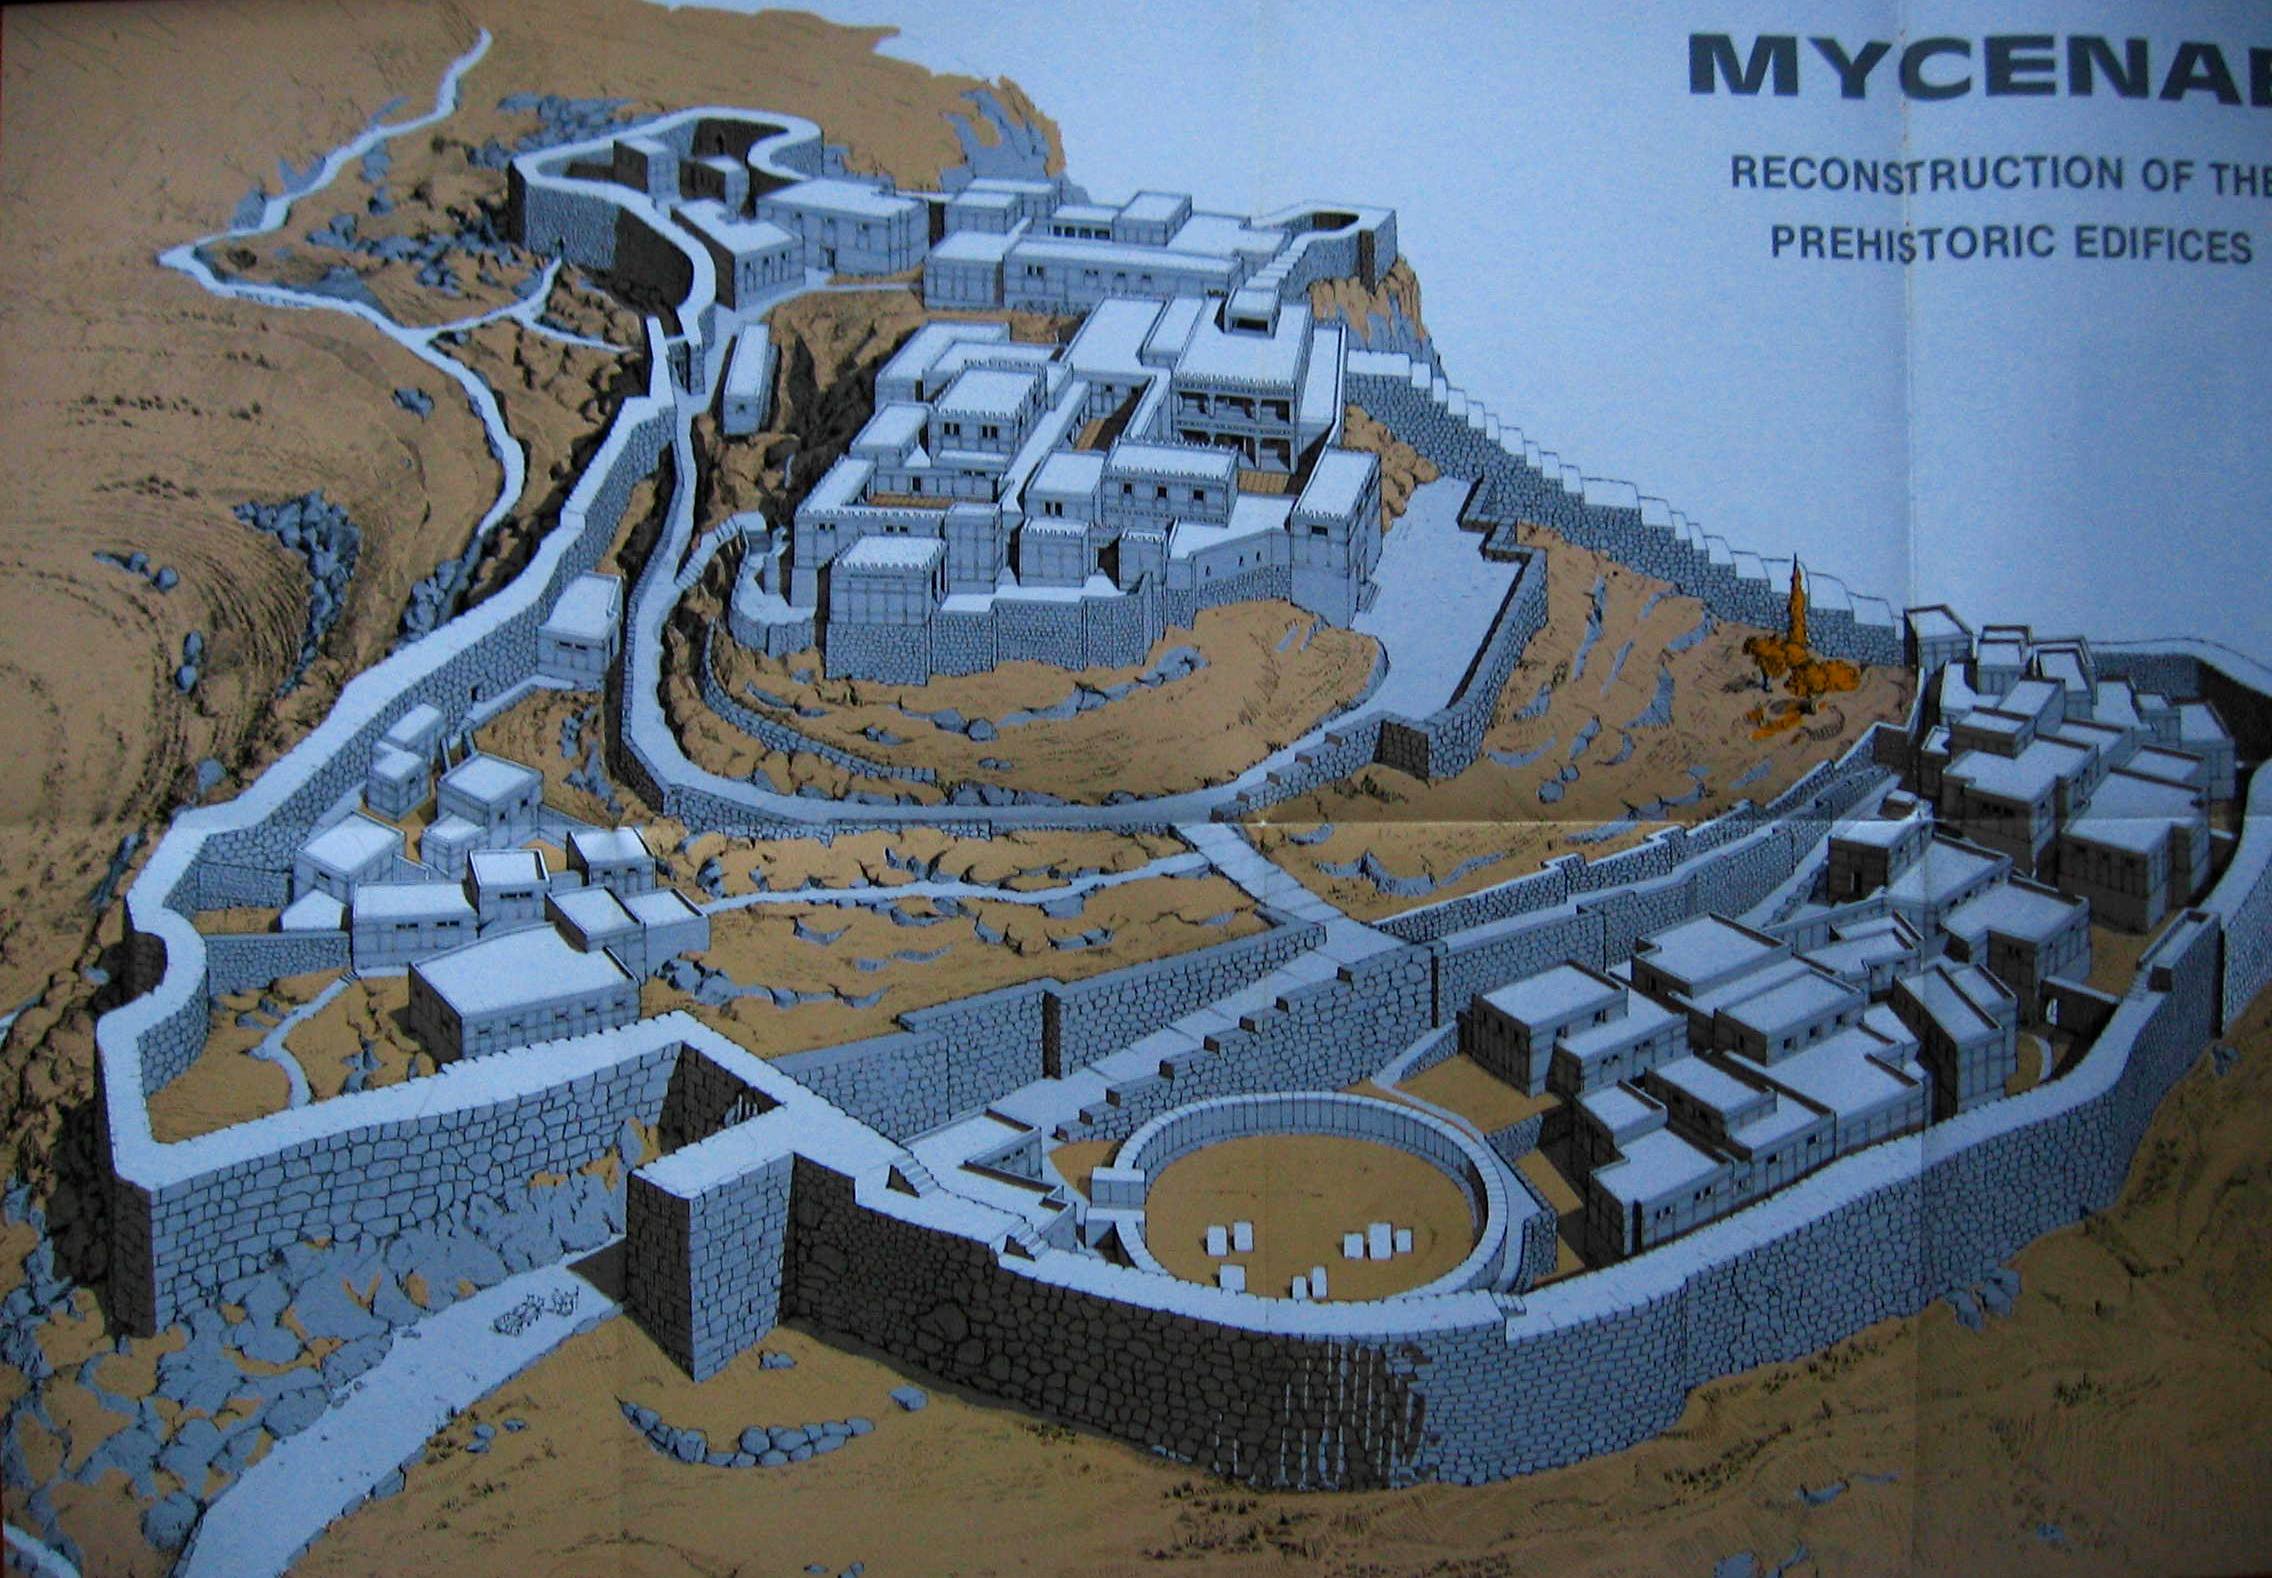 The main part of Mycenae is known as the citadel, or acropolis which dates back to the 16 to 12 C BC, the entrance to this is by the famous Lion Gate